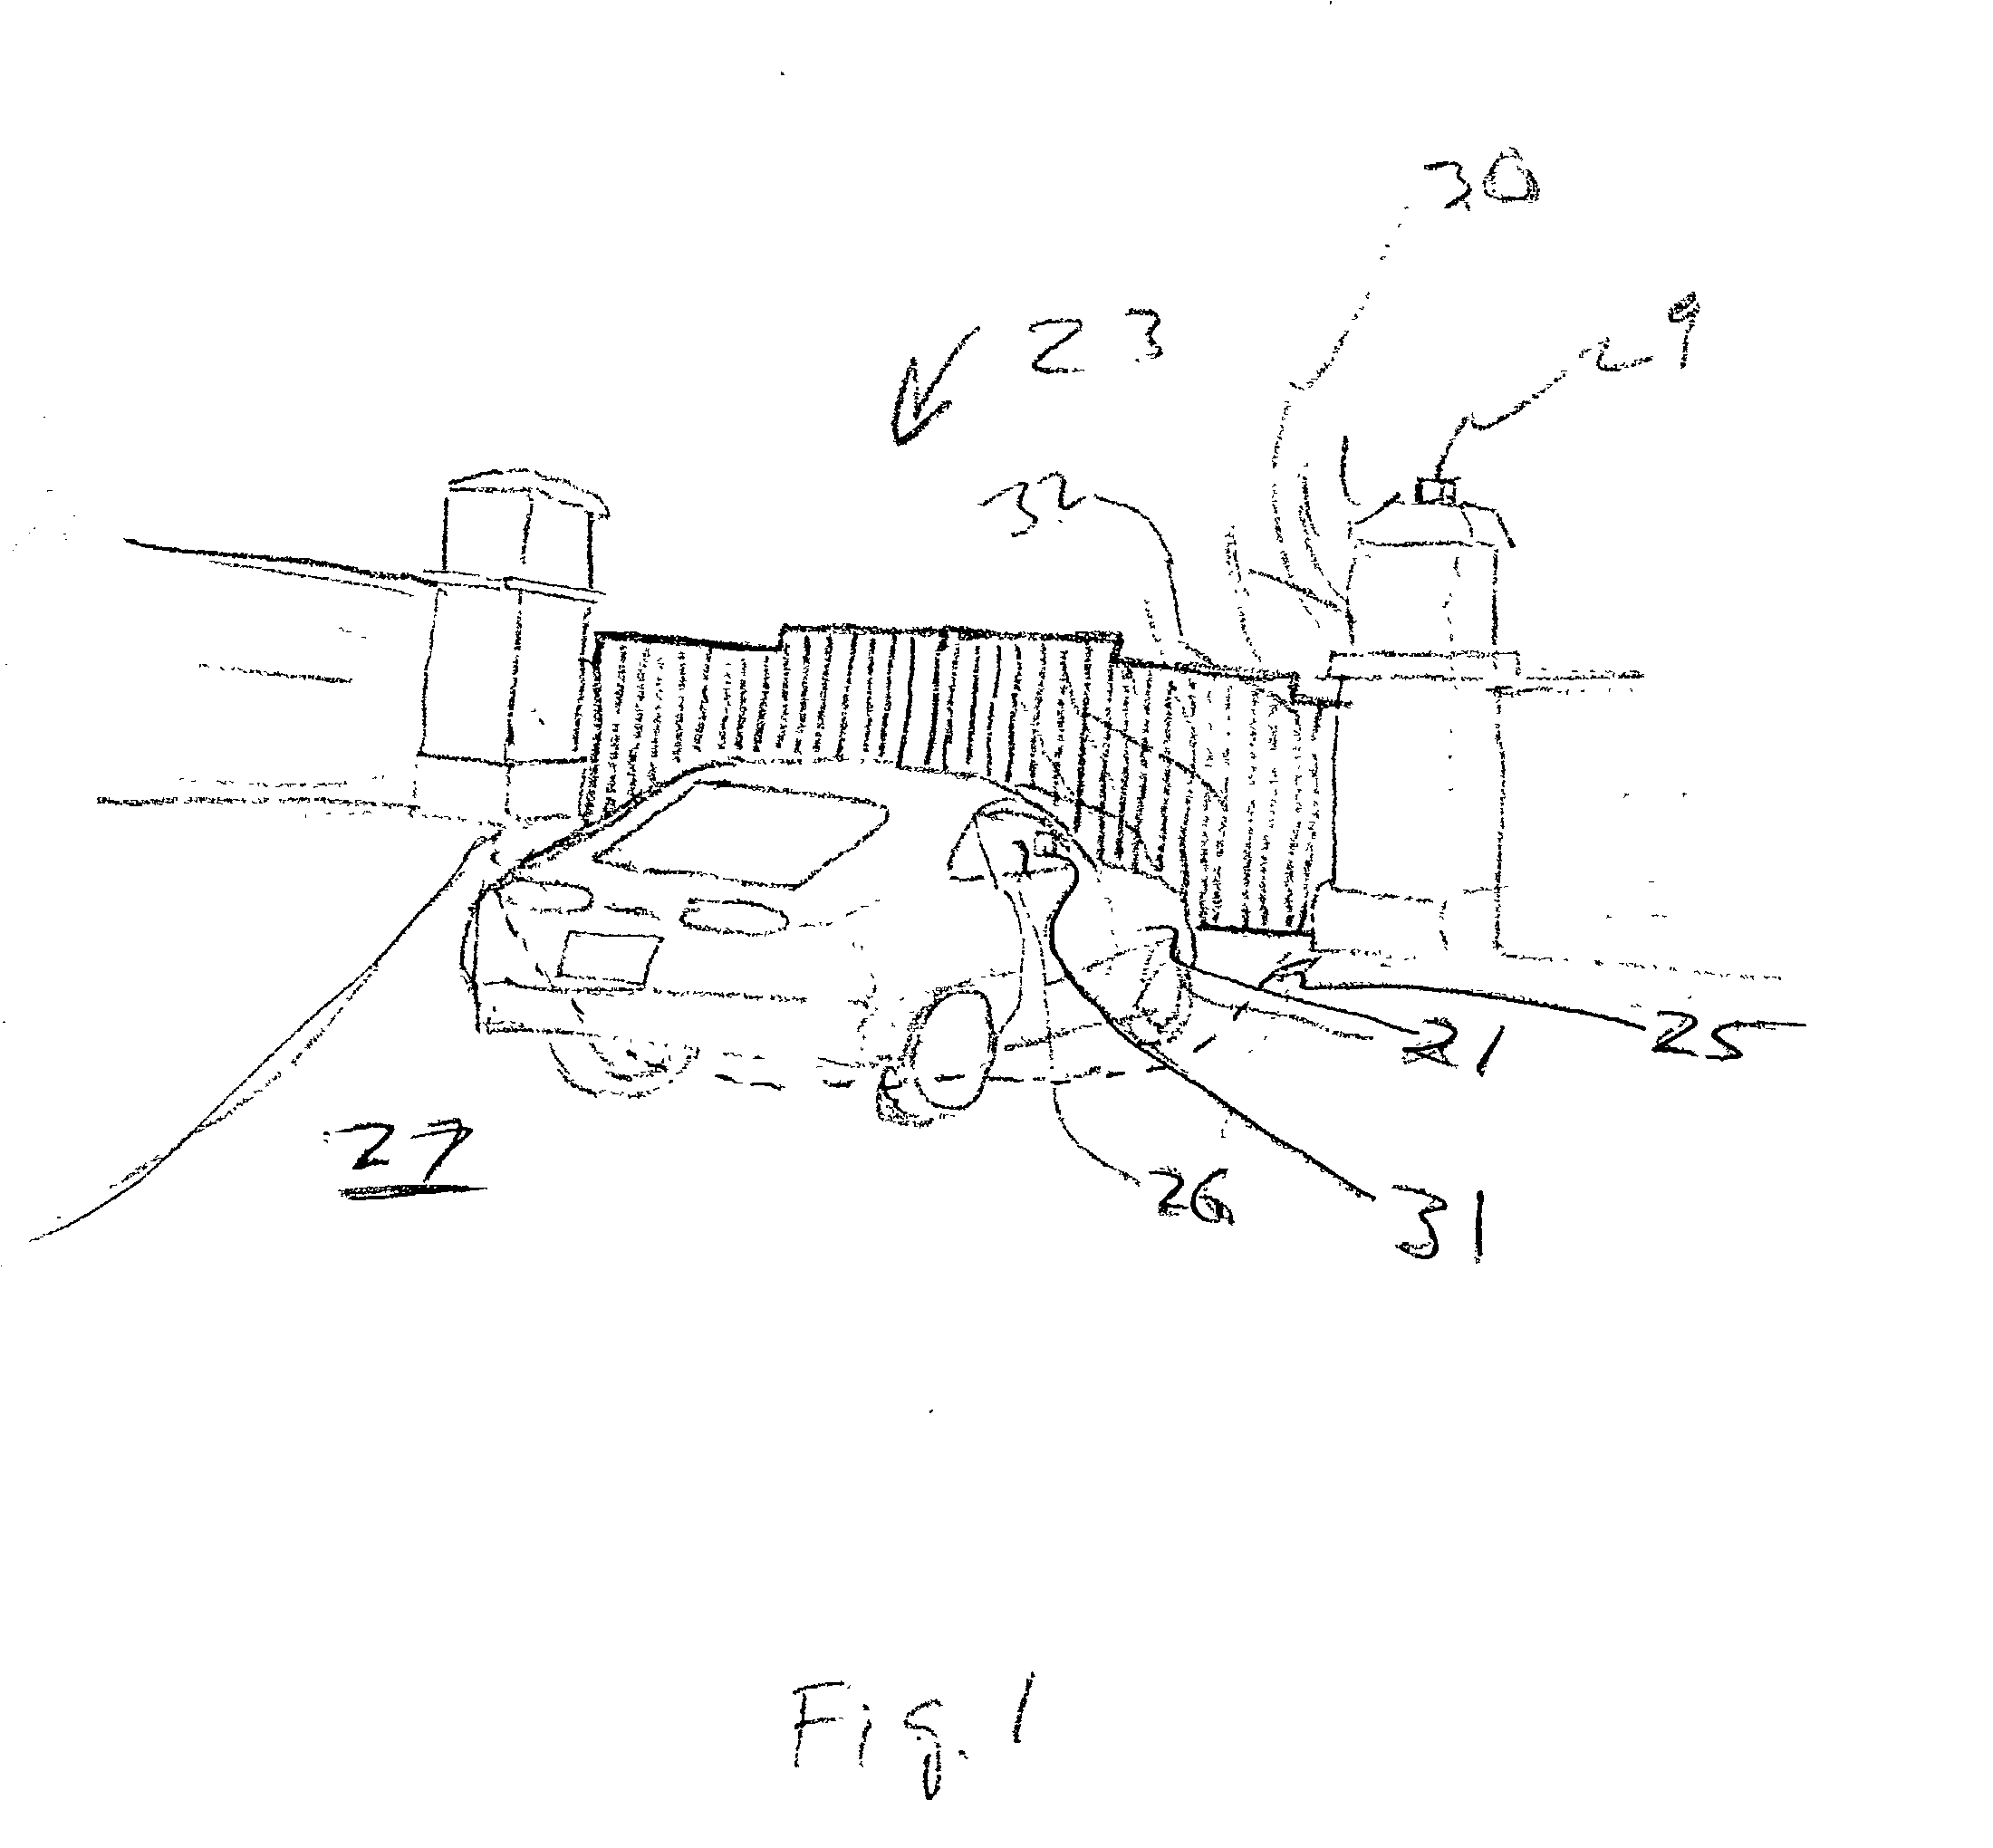 Manual override apparatus and method for an automated secure area entry access system